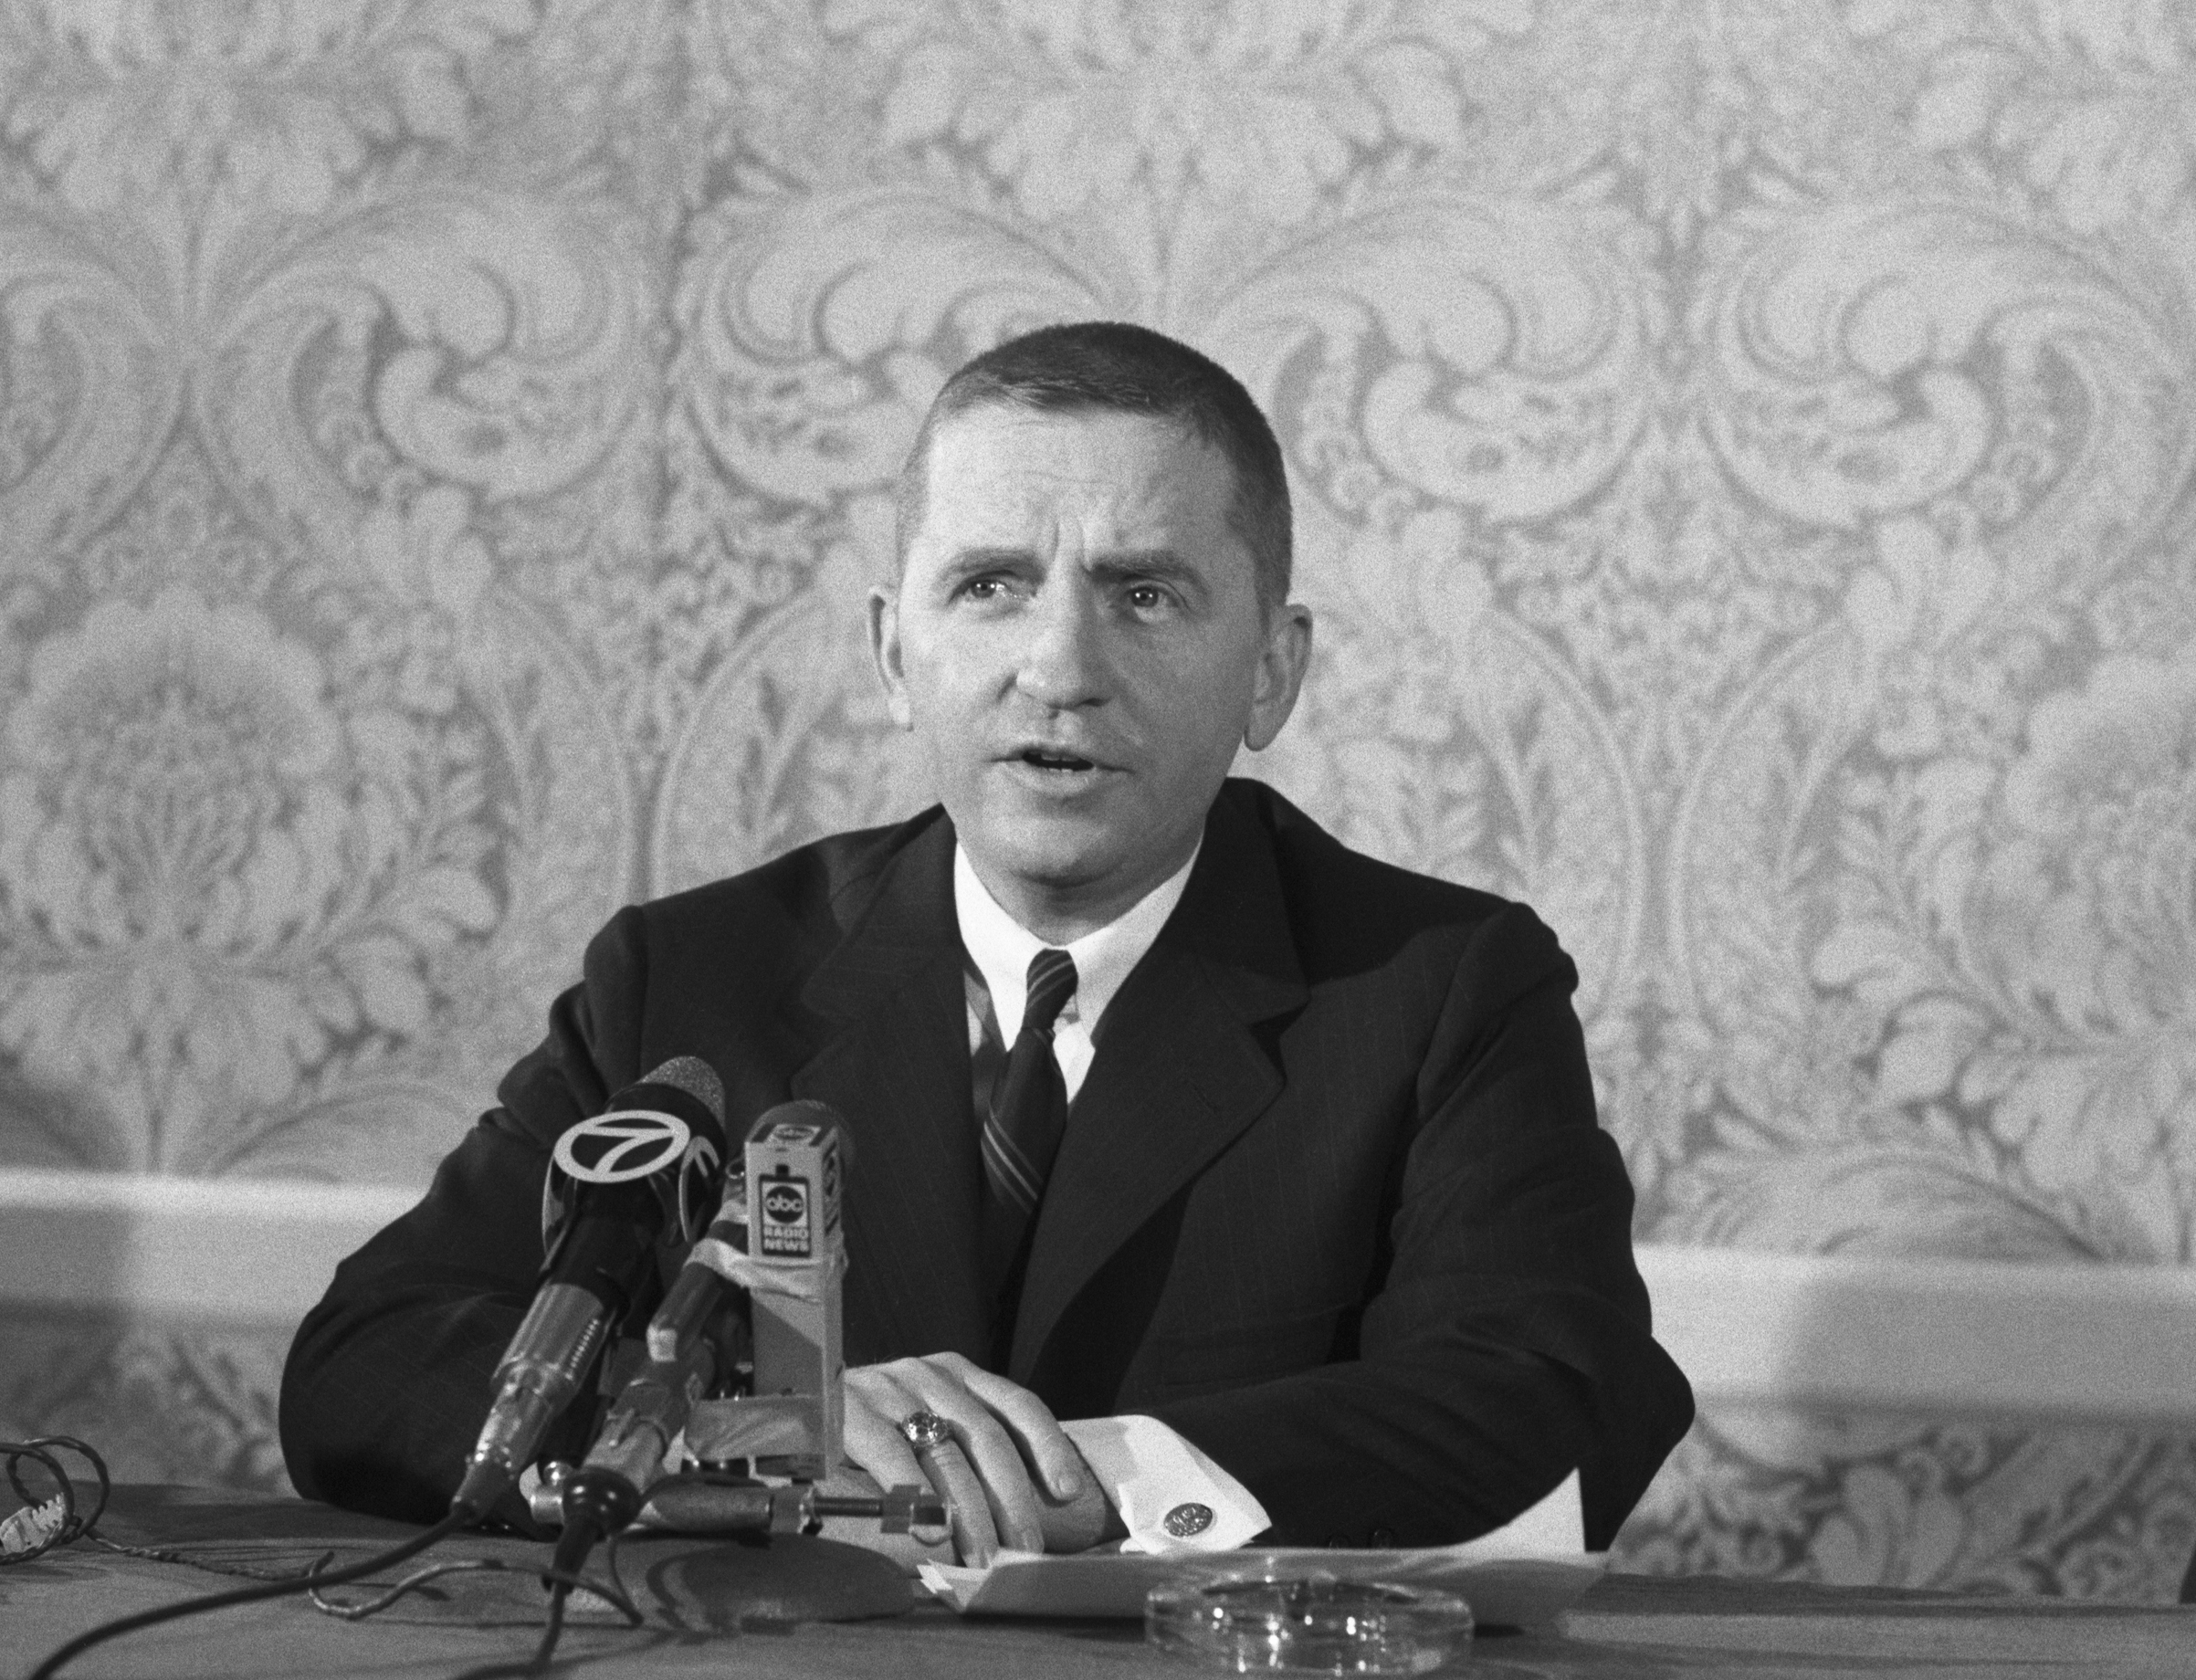 Texas millionaire Ross Perot holds a press conference Dec. 15, 1969, to tell of his plan to fly Christmas packages to U.S. military prisoners in North Vietnam (Bettmann Archive/Getty Images)